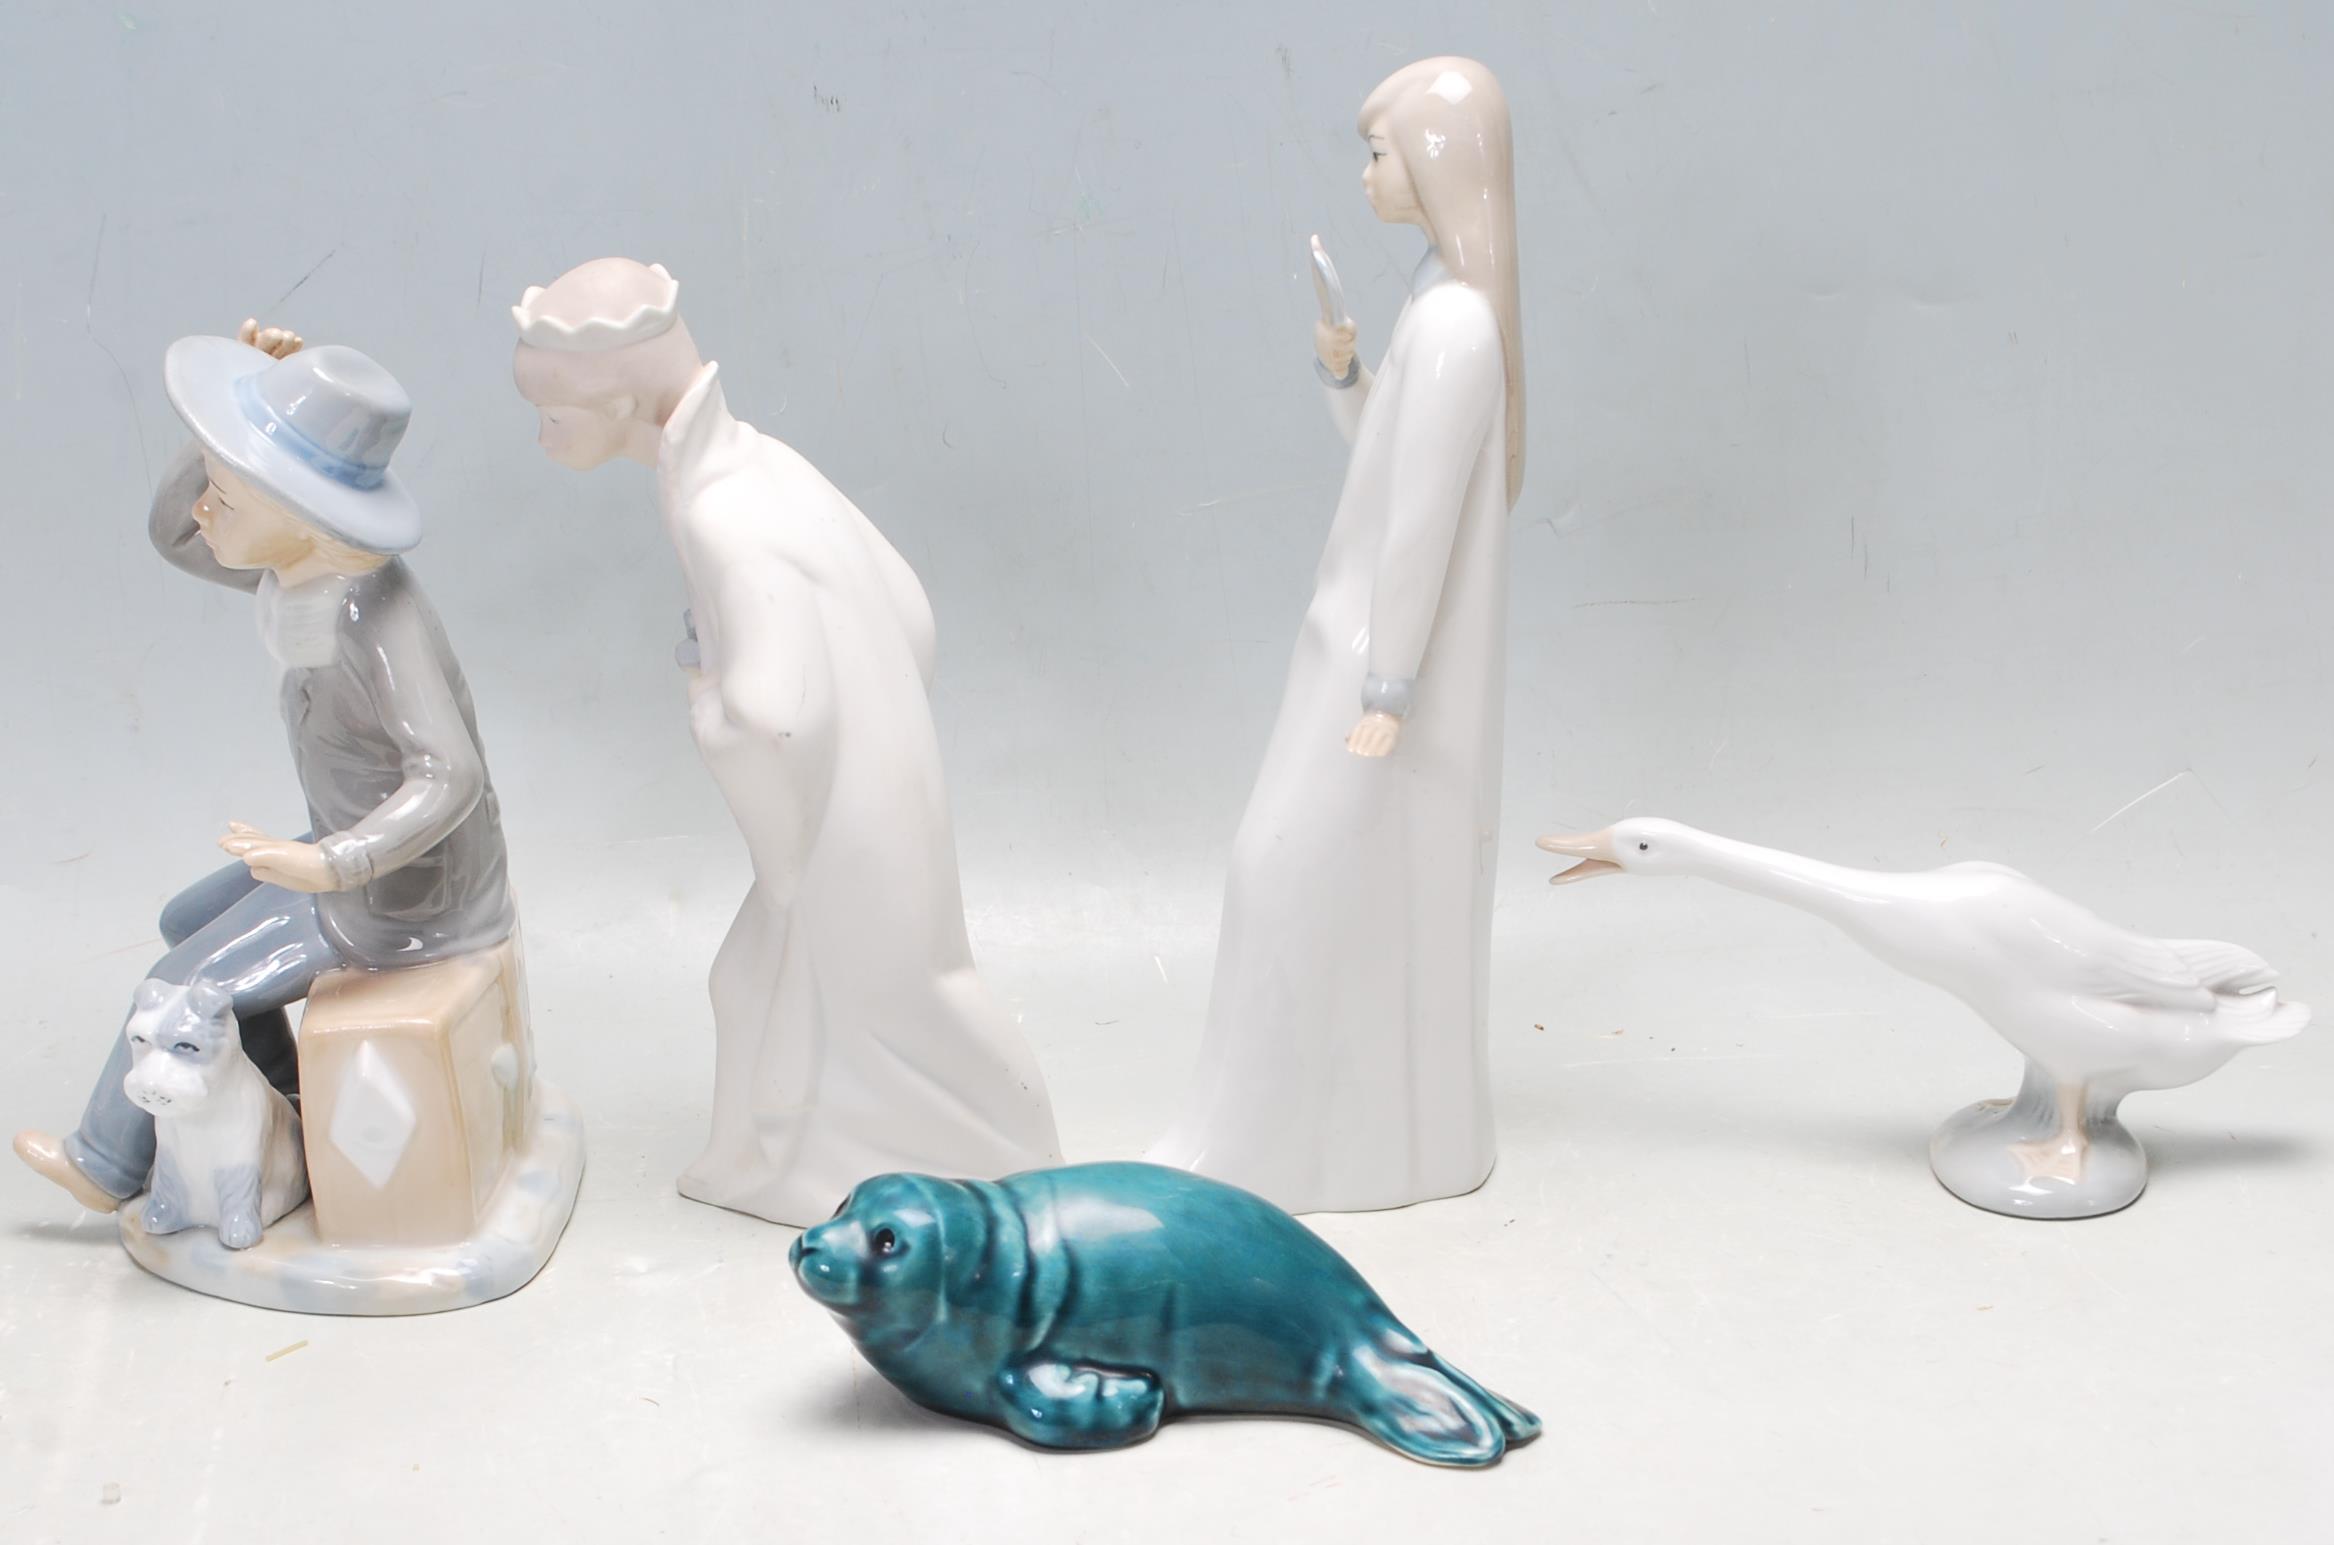 COLLECTION OF VINTAGE LATE 20TH CENTURY PORCELAIN FIGURINES BY LLADRO AND CASADES - Image 4 of 7